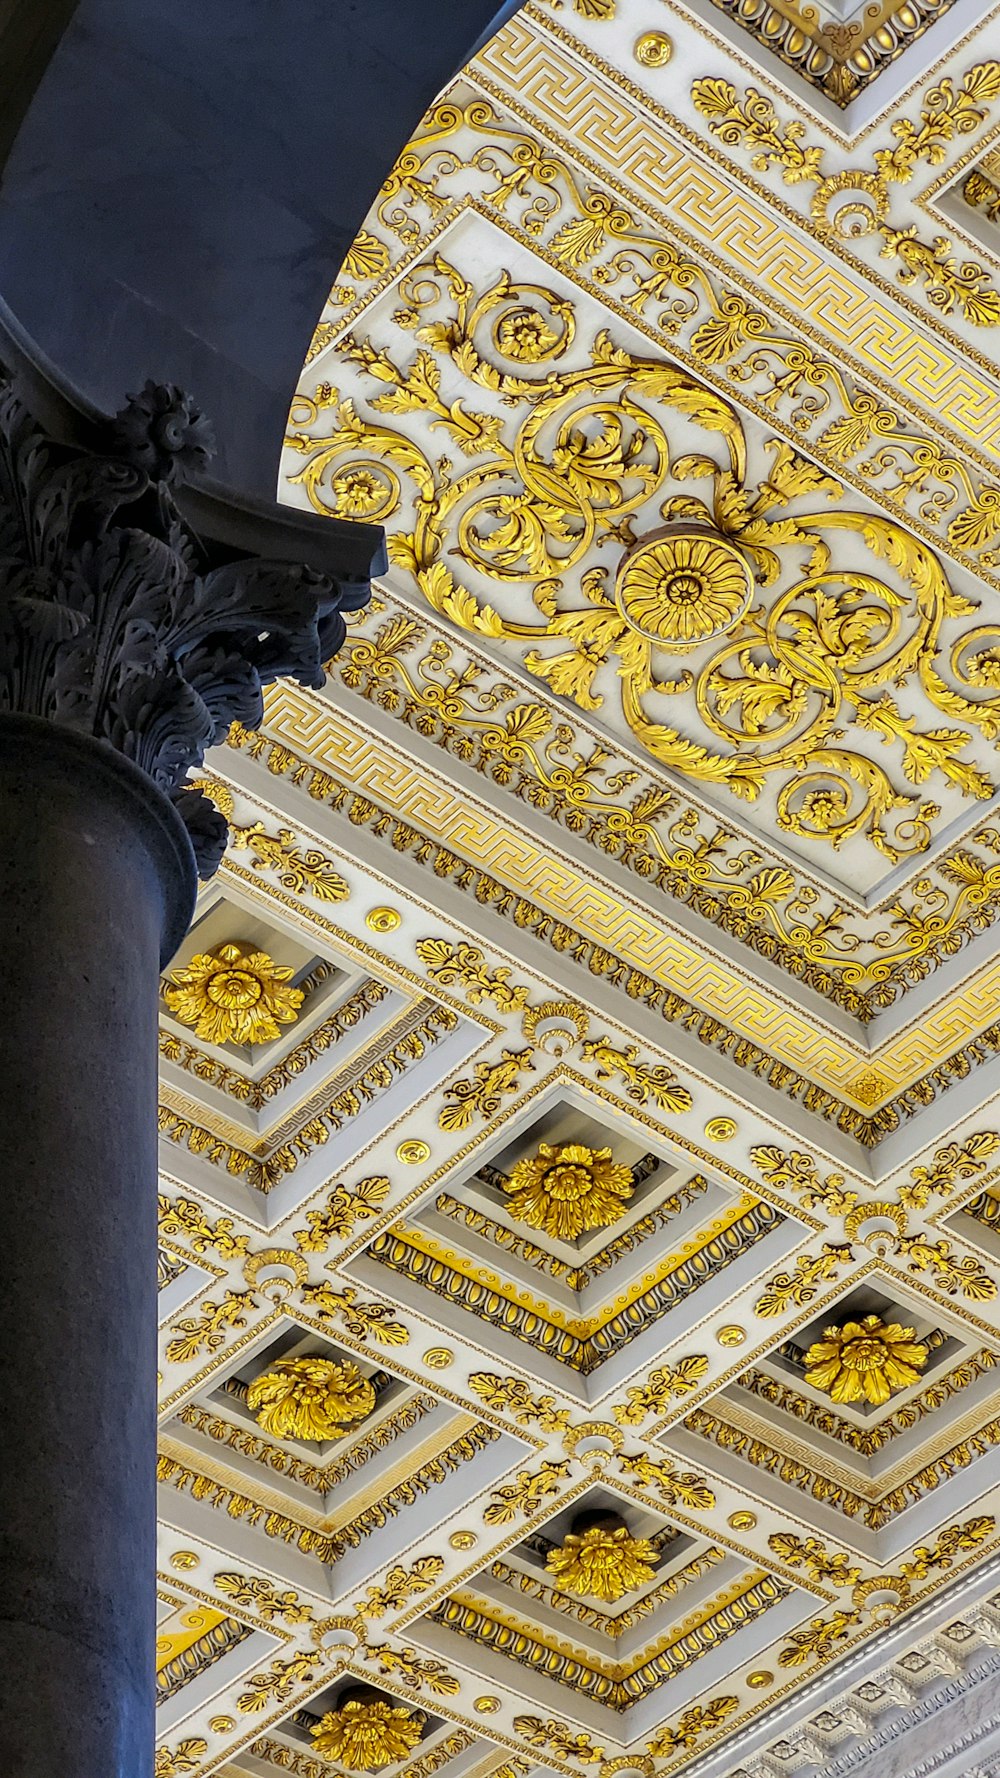 the ceiling of a building with gold and white designs